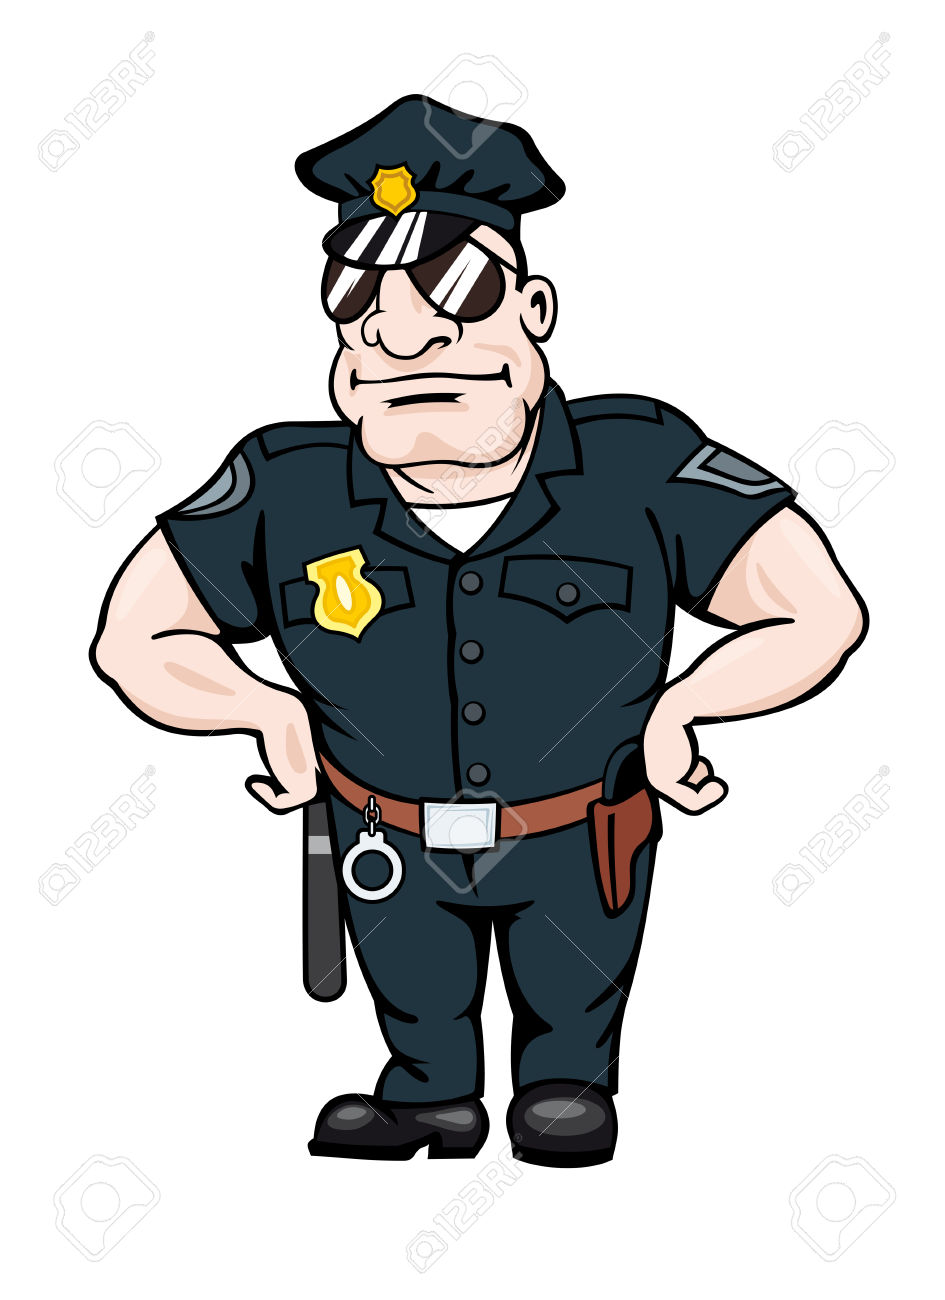 Cartoon Police Officer Clipart | Free download on ClipArtMag